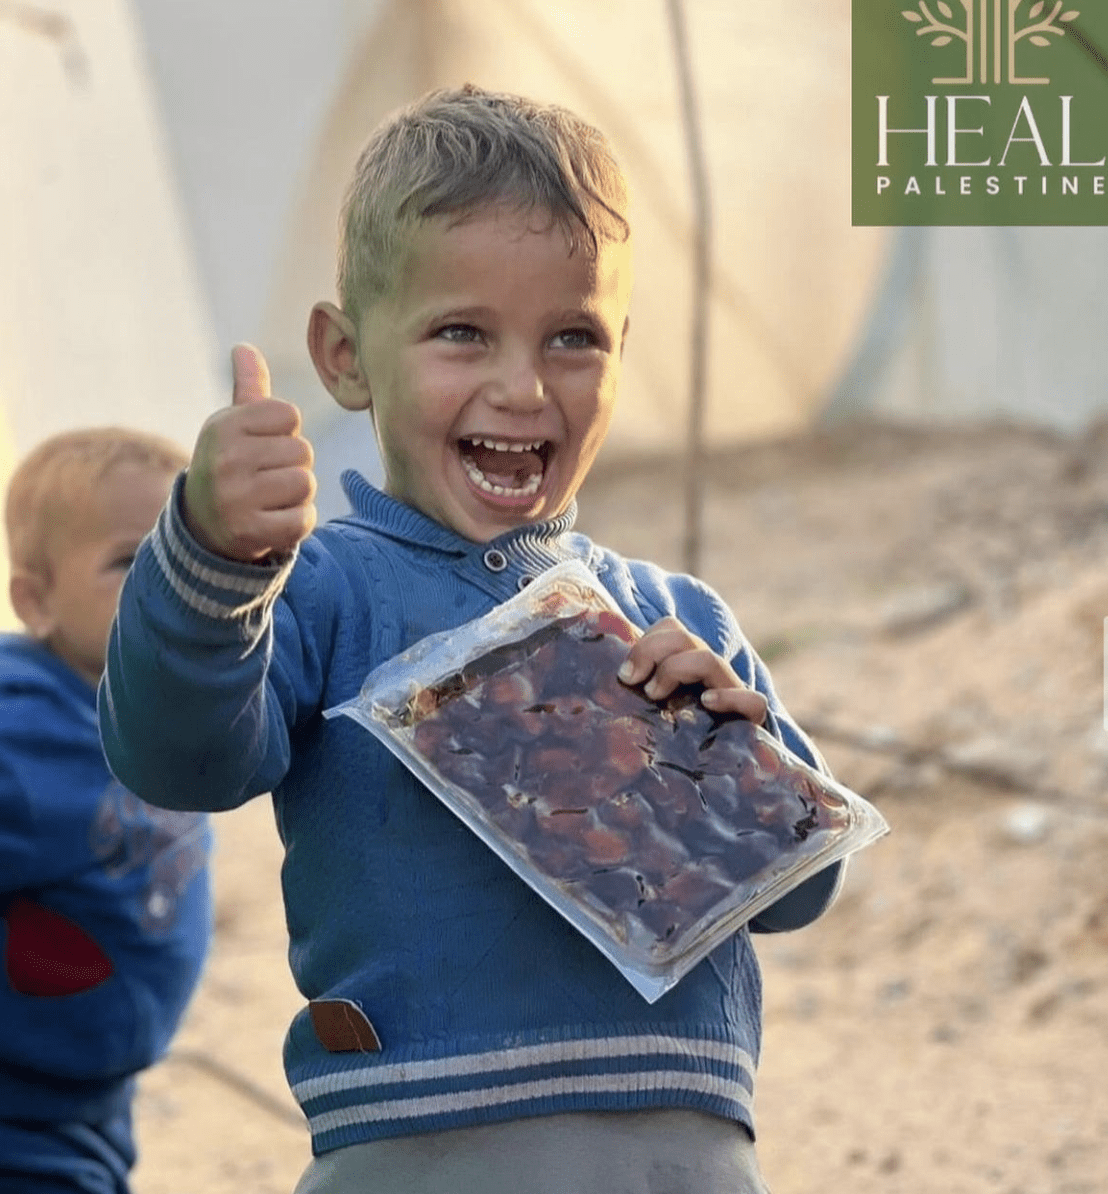 HEAL Palestine Distributes Dates to Families, during the Holy Month of Ramadan.